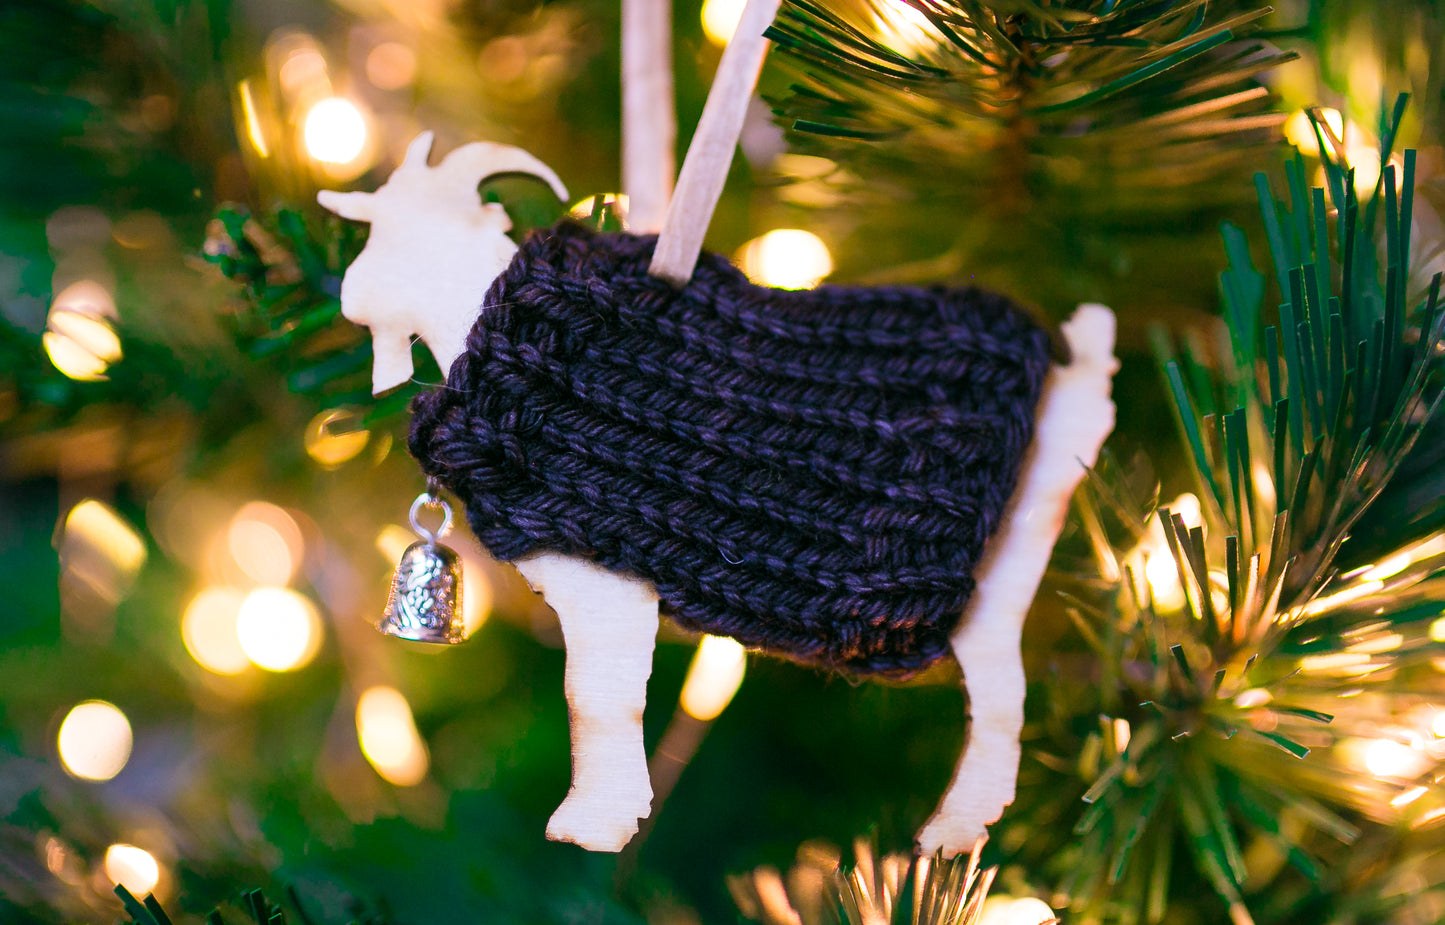 Holiday Decorations Ornaments Goats in Handknit Sweaters